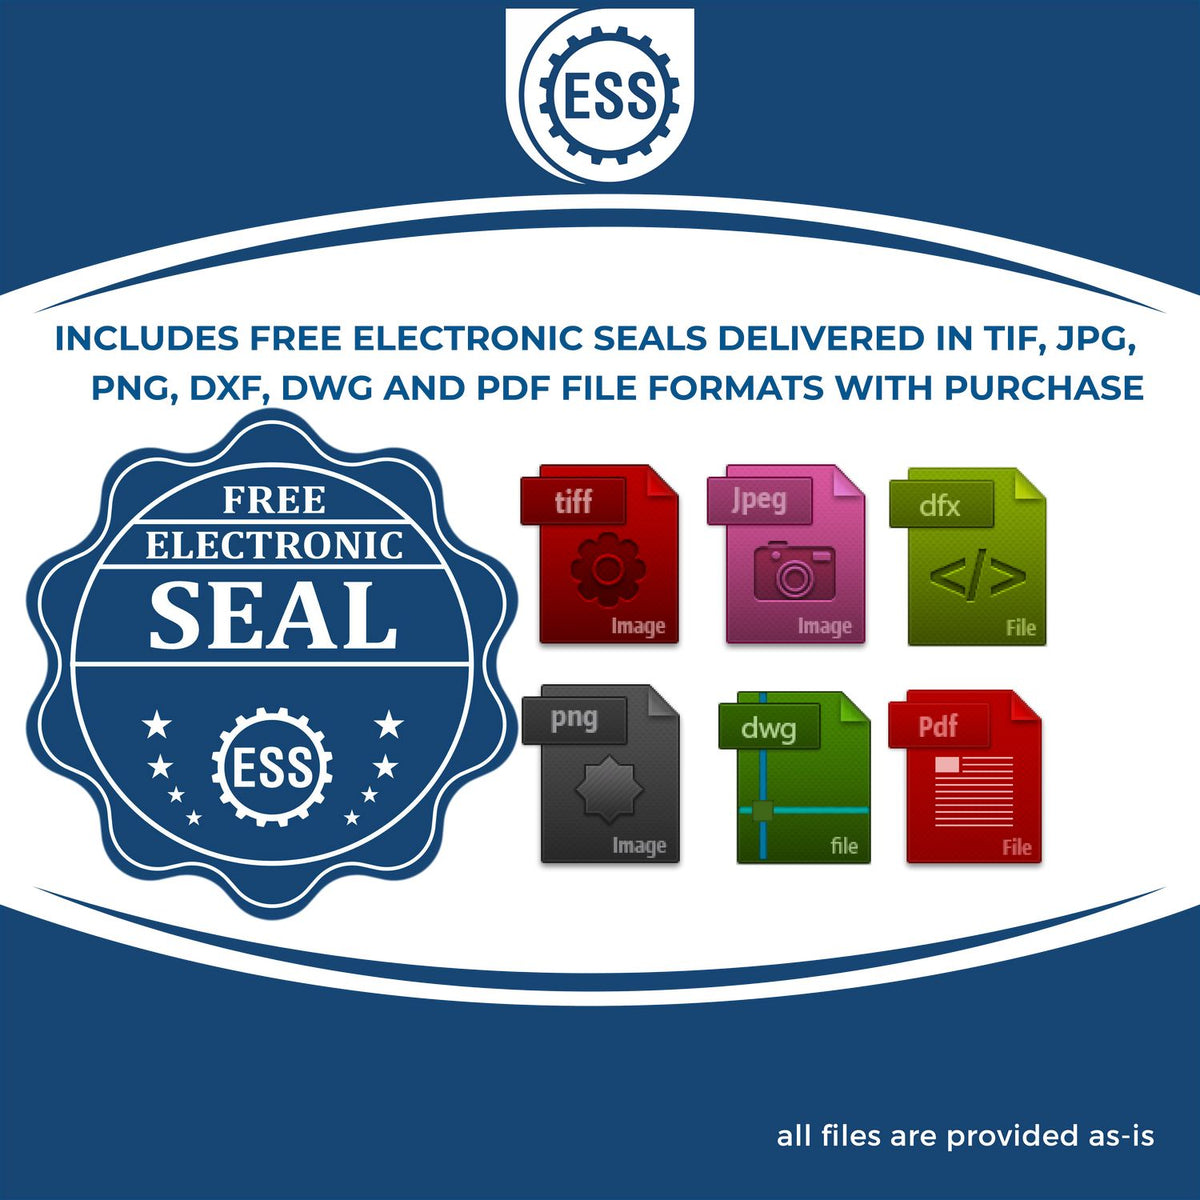 An infographic for the free electronic seal for the Premium MaxLight Pre-Inked Oregon Geology Stamp illustrating the different file type icons such as DXF, DWG, TIF, JPG and PNG.